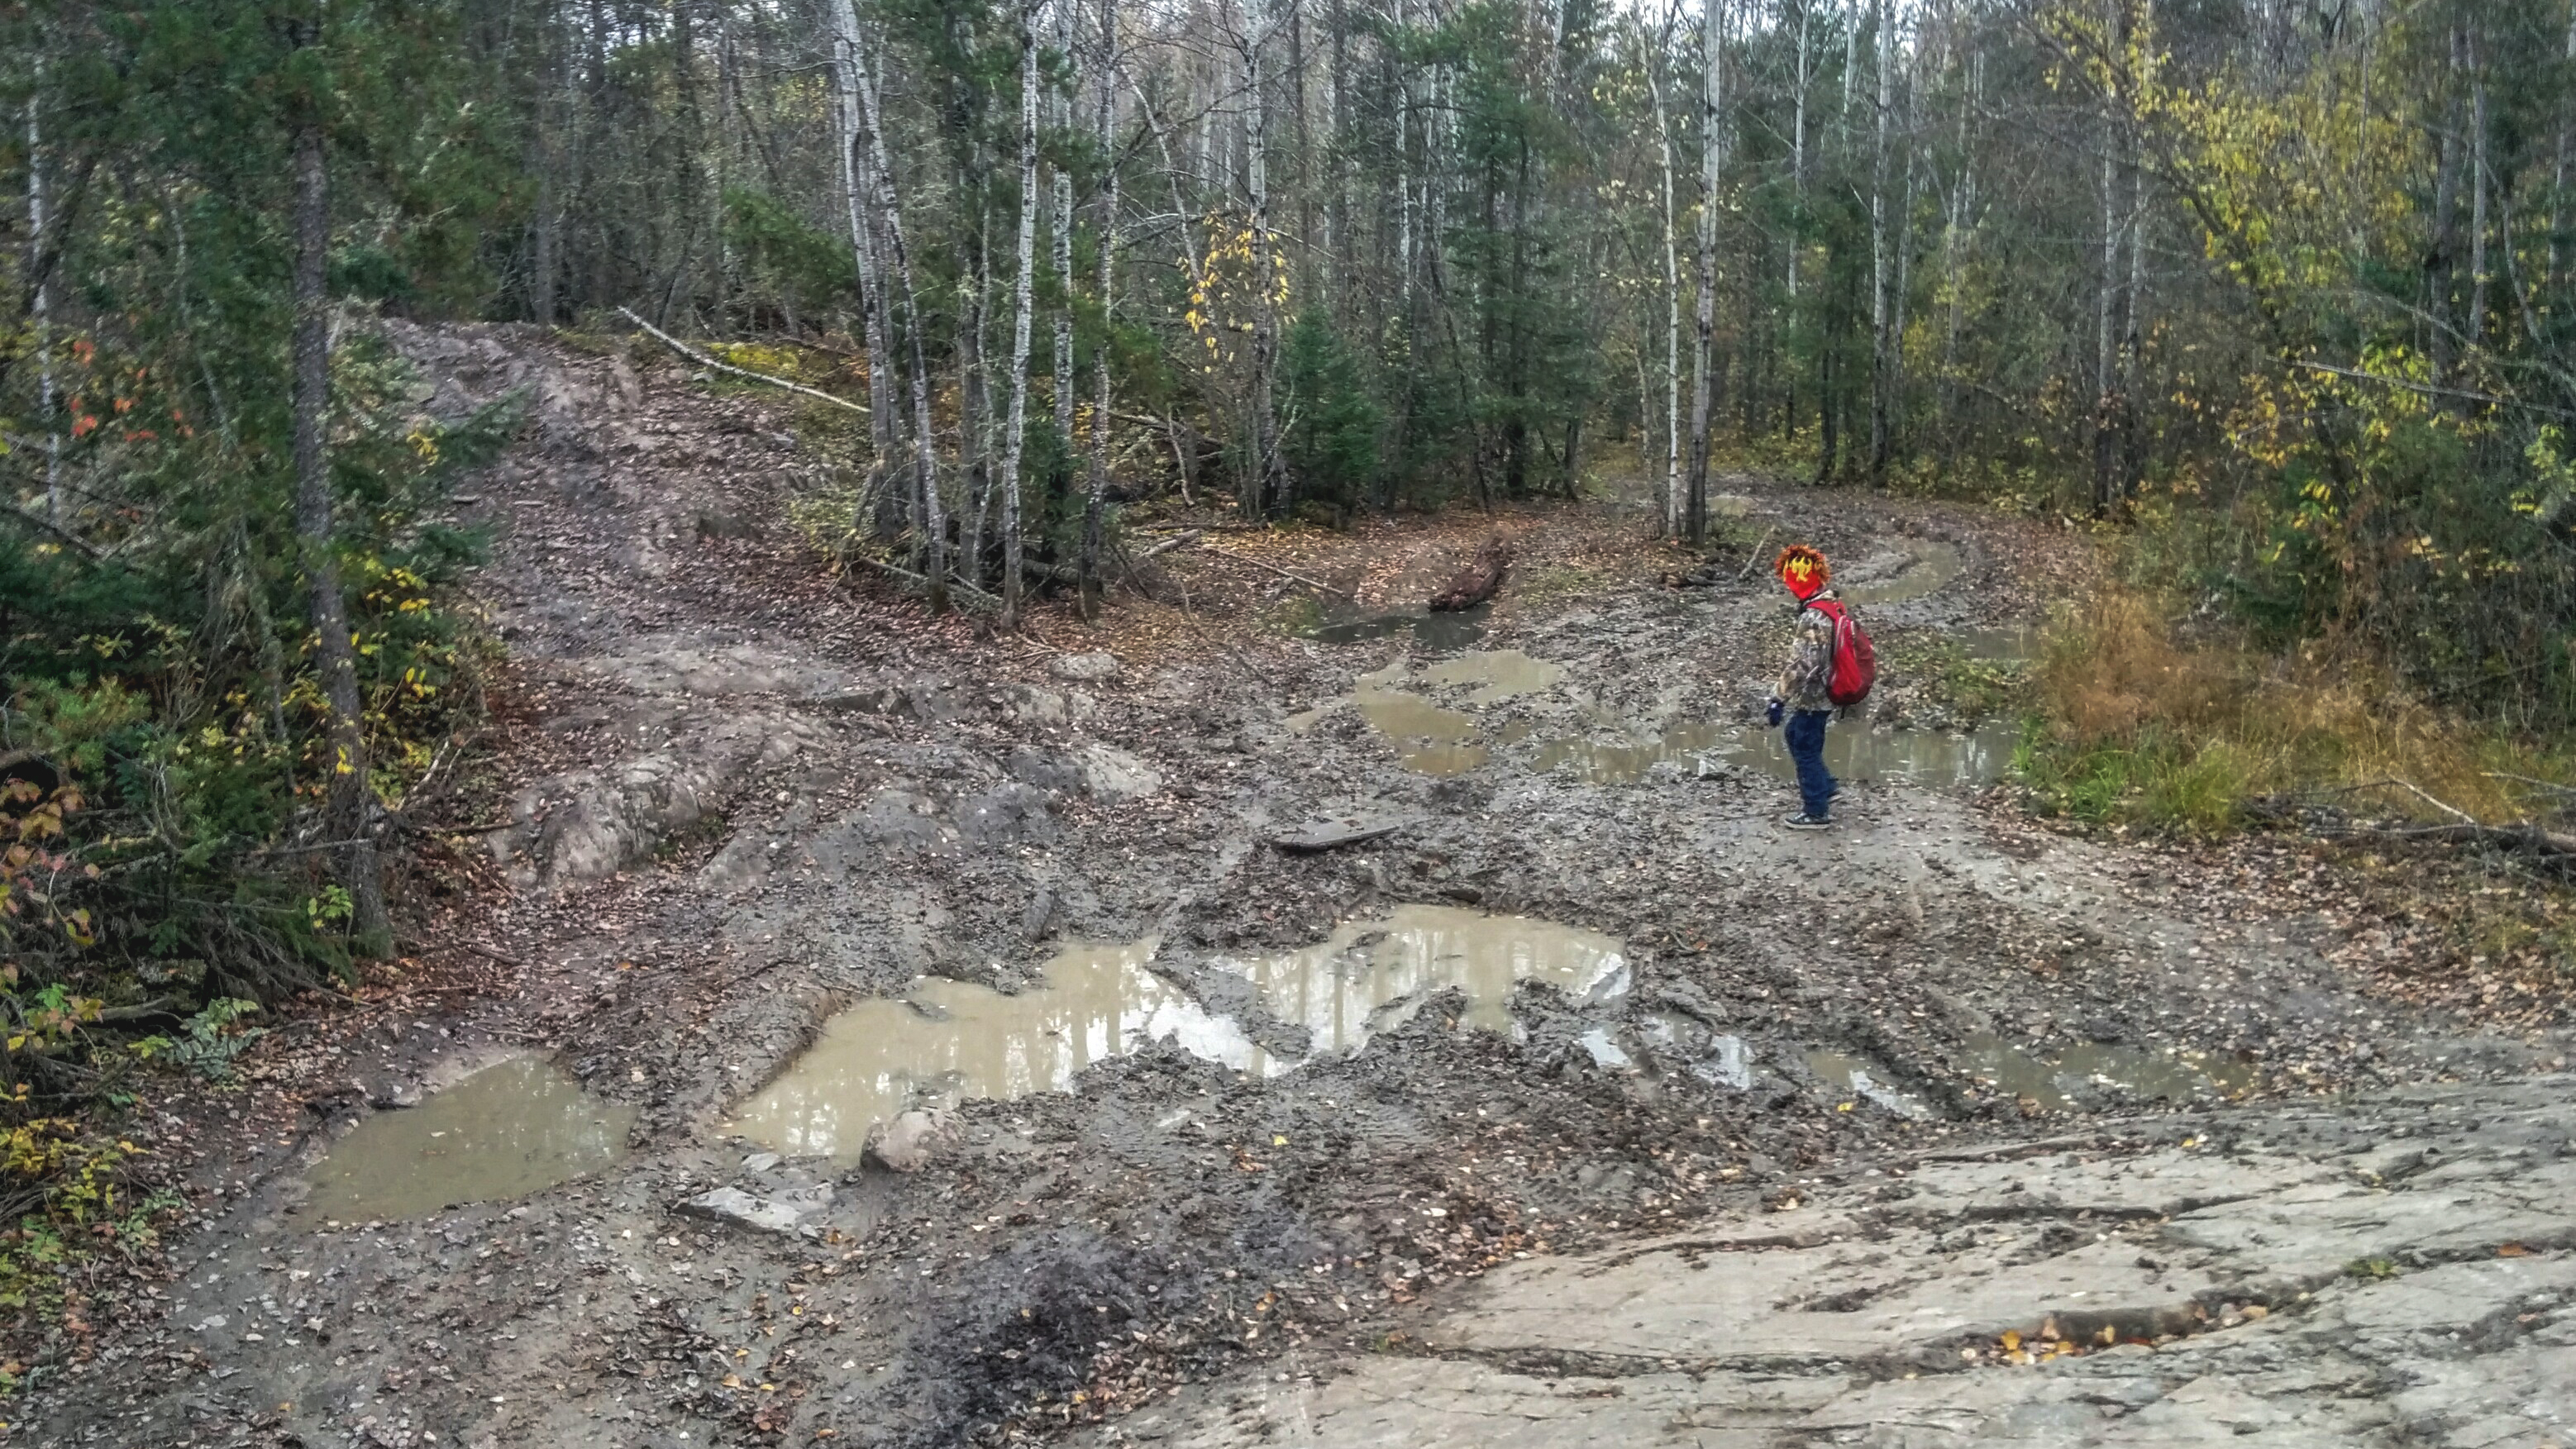 Wrecked trails from all-terrain vehicles in Nopiming Provincial Park